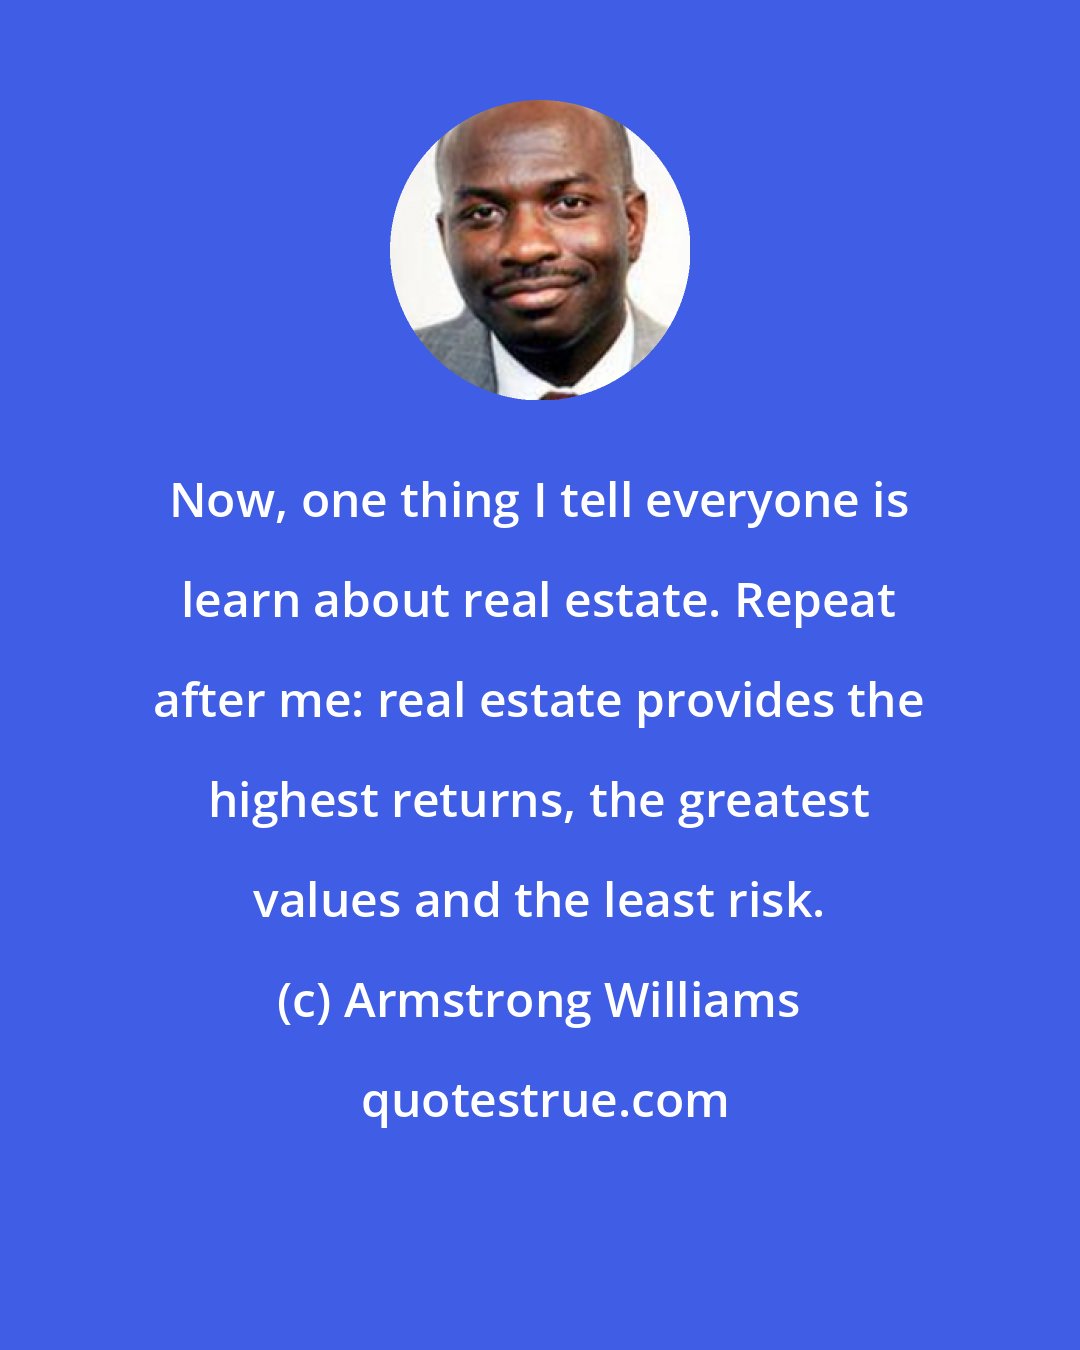 Armstrong Williams: Now, one thing I tell everyone is learn about real estate. Repeat after me: real estate provides the highest returns, the greatest values and the least risk.